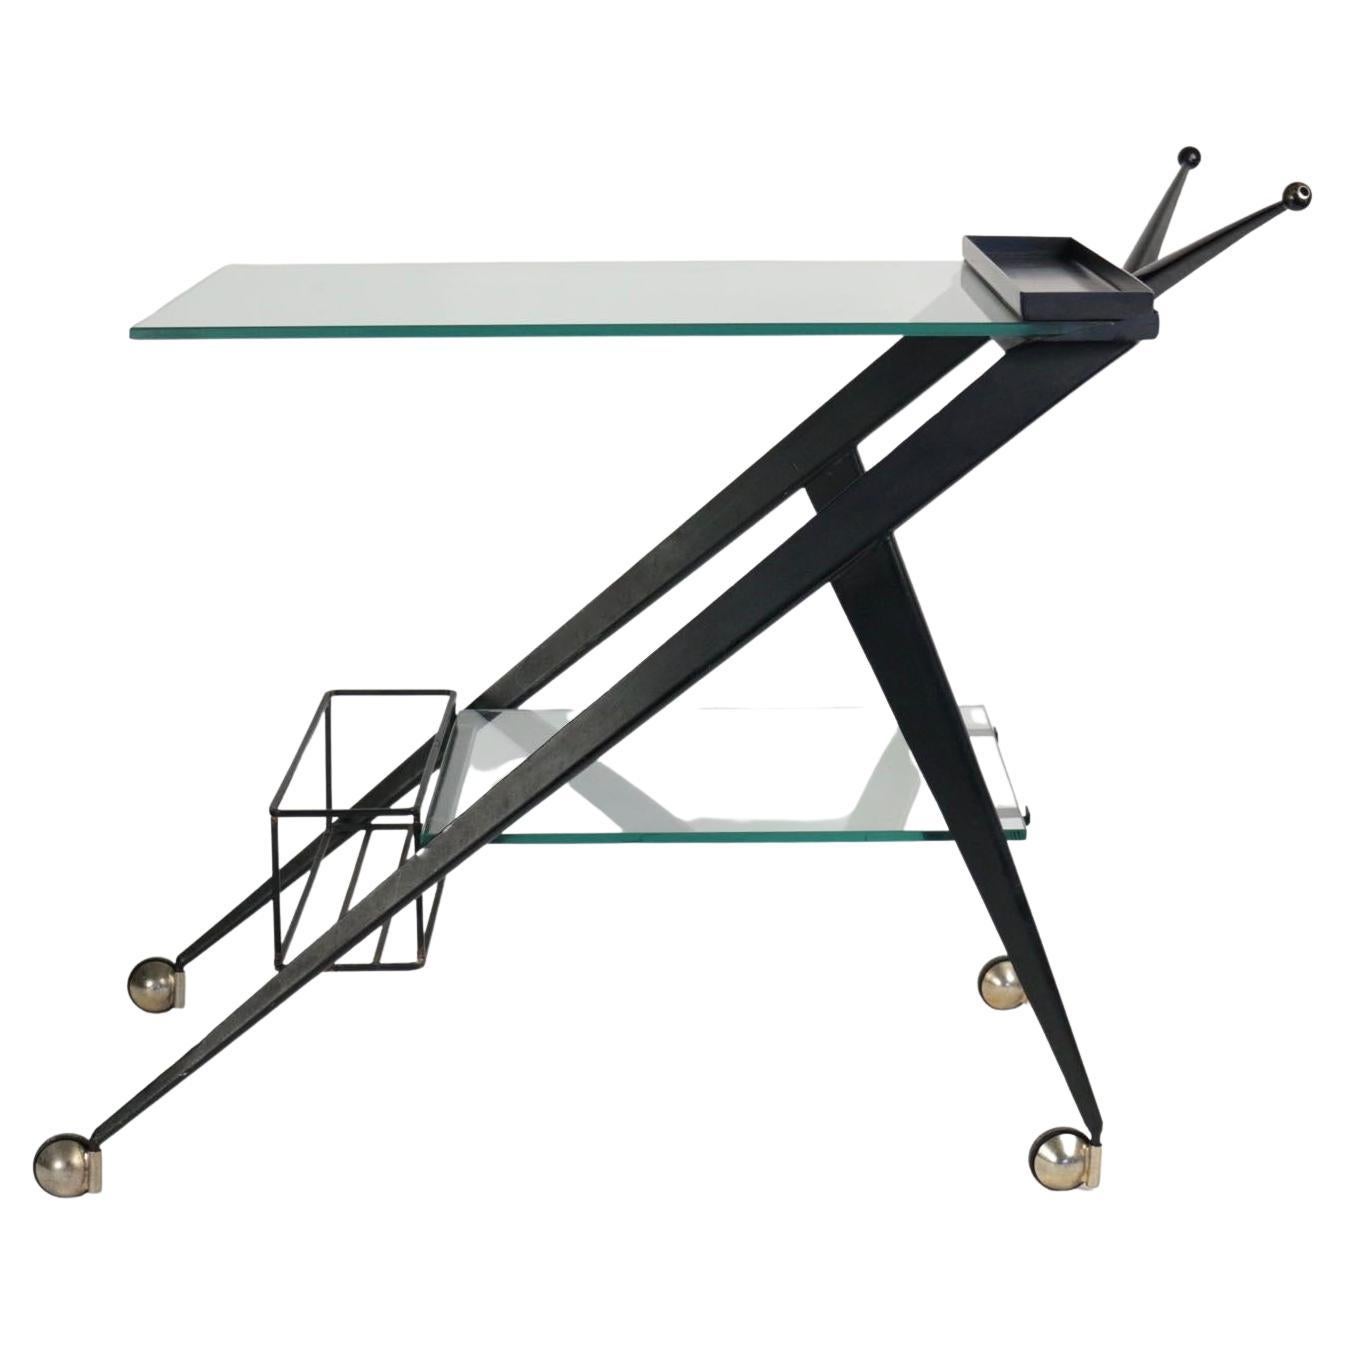 1950s table on wheels by Angelo Ostuni.
A typical table on wheels with bottle holder, black lacquered folded metal based and handles decorated with amazing V-folded metal with a ball finish.
